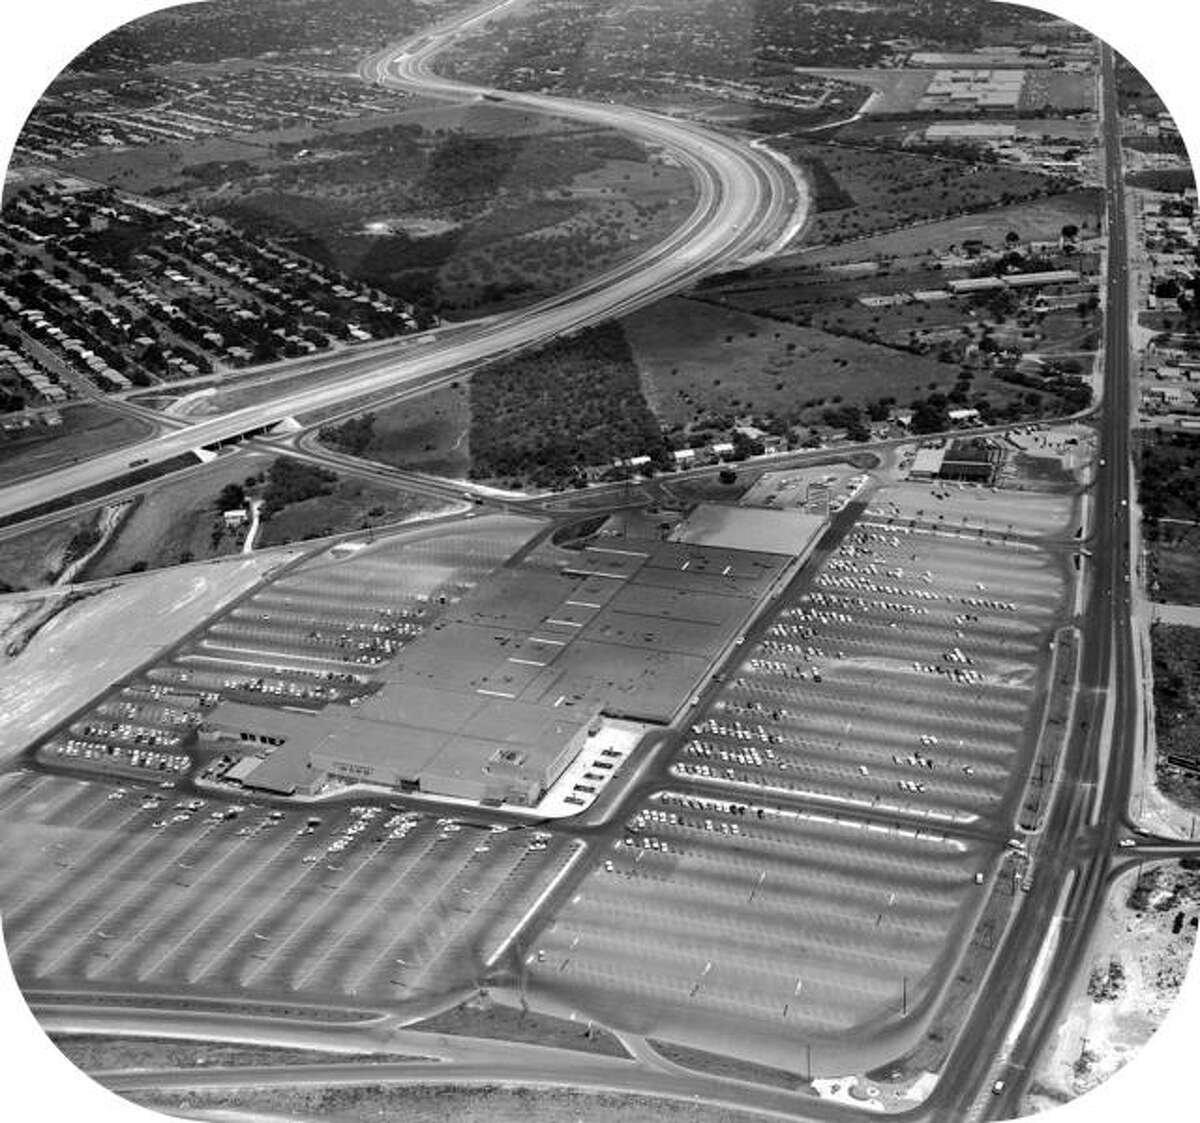 Wonderland of the Americas mall between Interstate 10, left, and Fredericksburg Road, right, as seen in an undated photo.